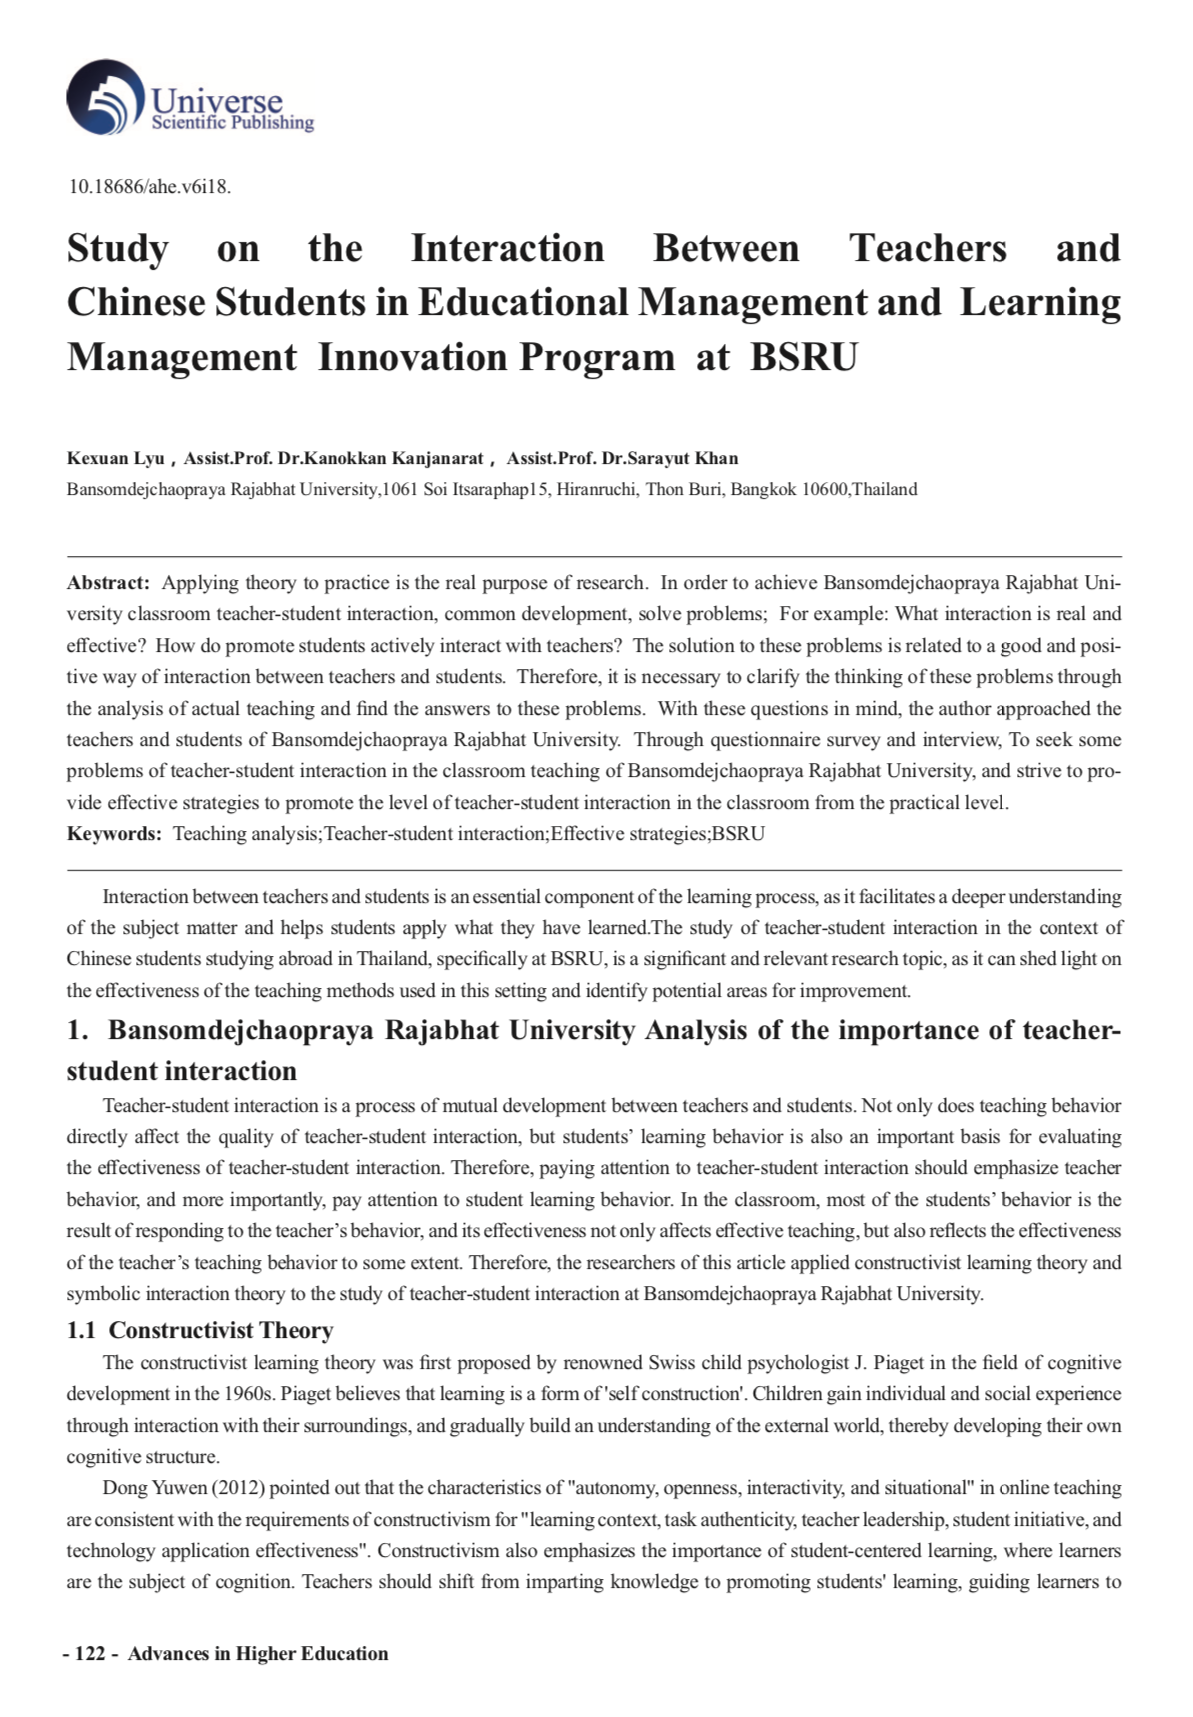 Study on the Interaction between Teachers and Chinese Students in Educational Management and Learning Management Innovation Program at BSRU